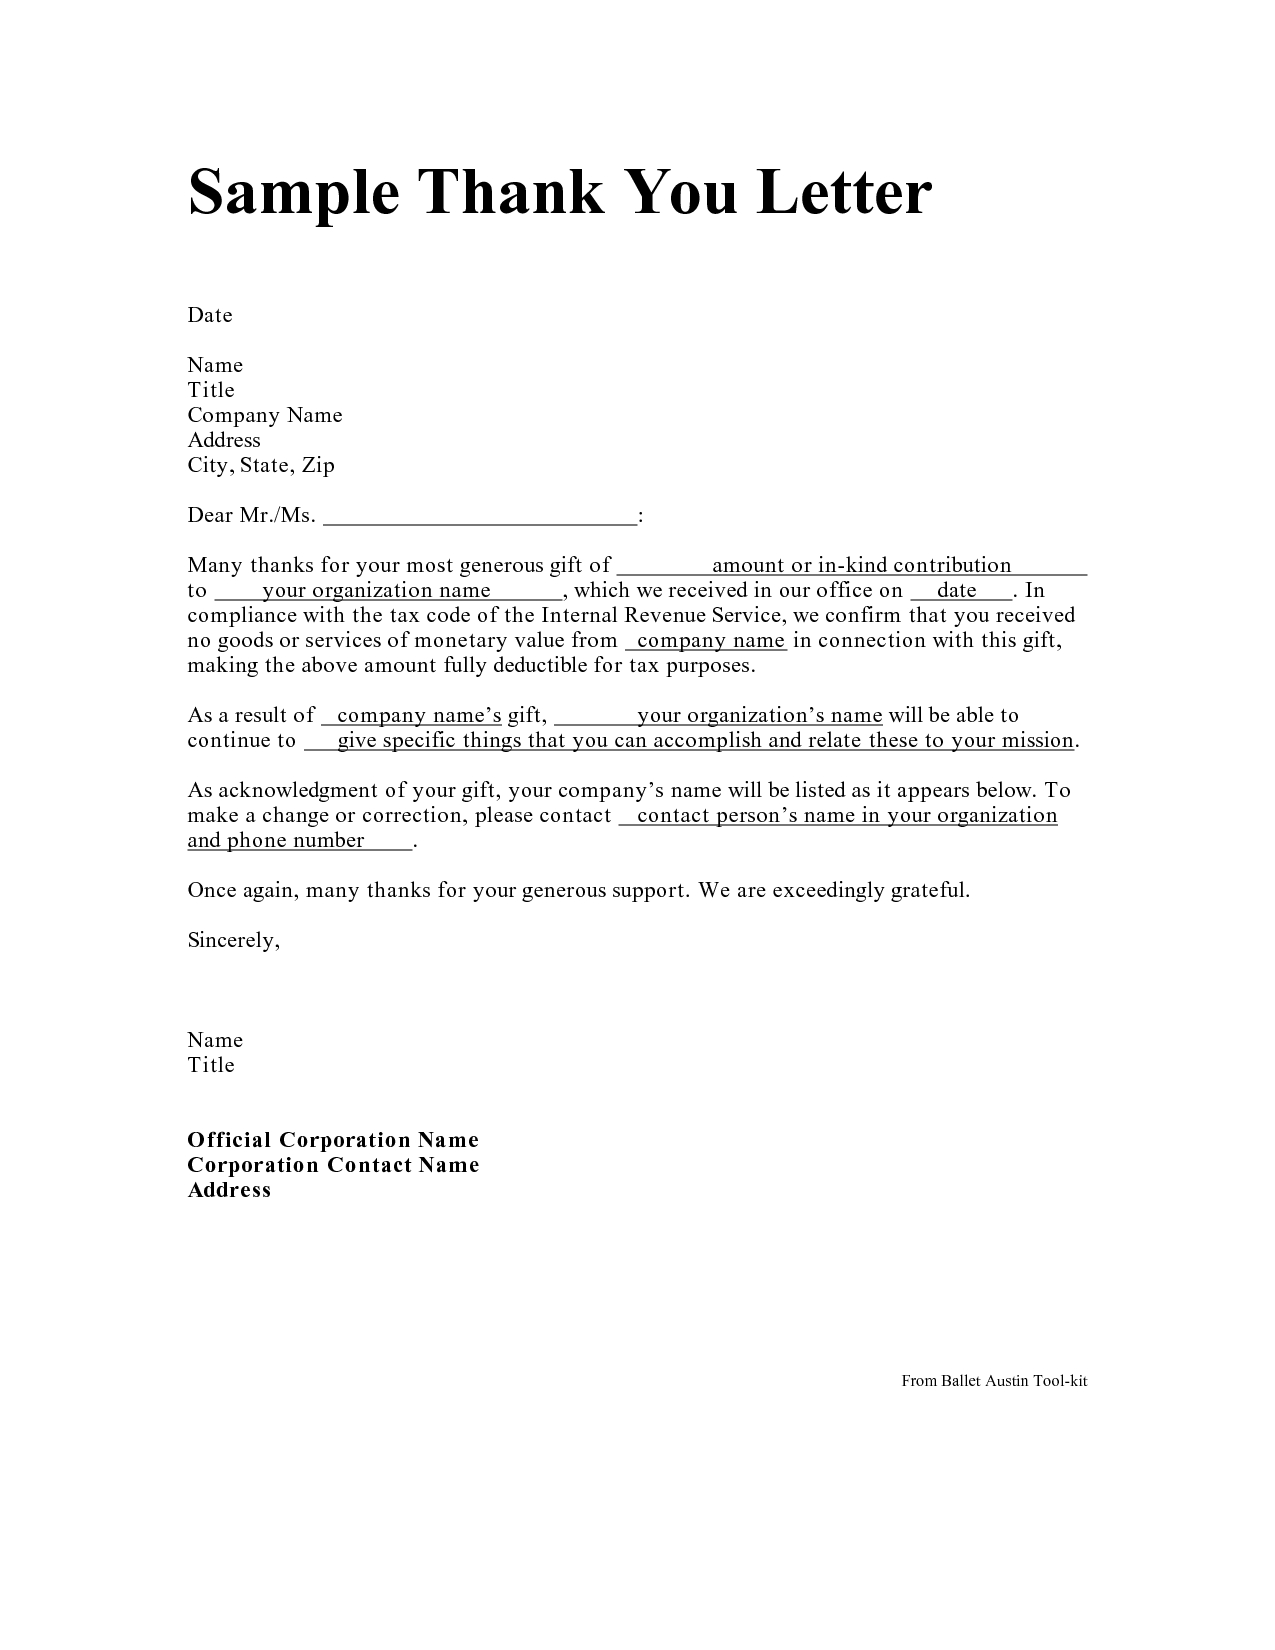 Charge Off Dispute Letter Template - Personal Thank You Letter Personal Thank You Letter Samples